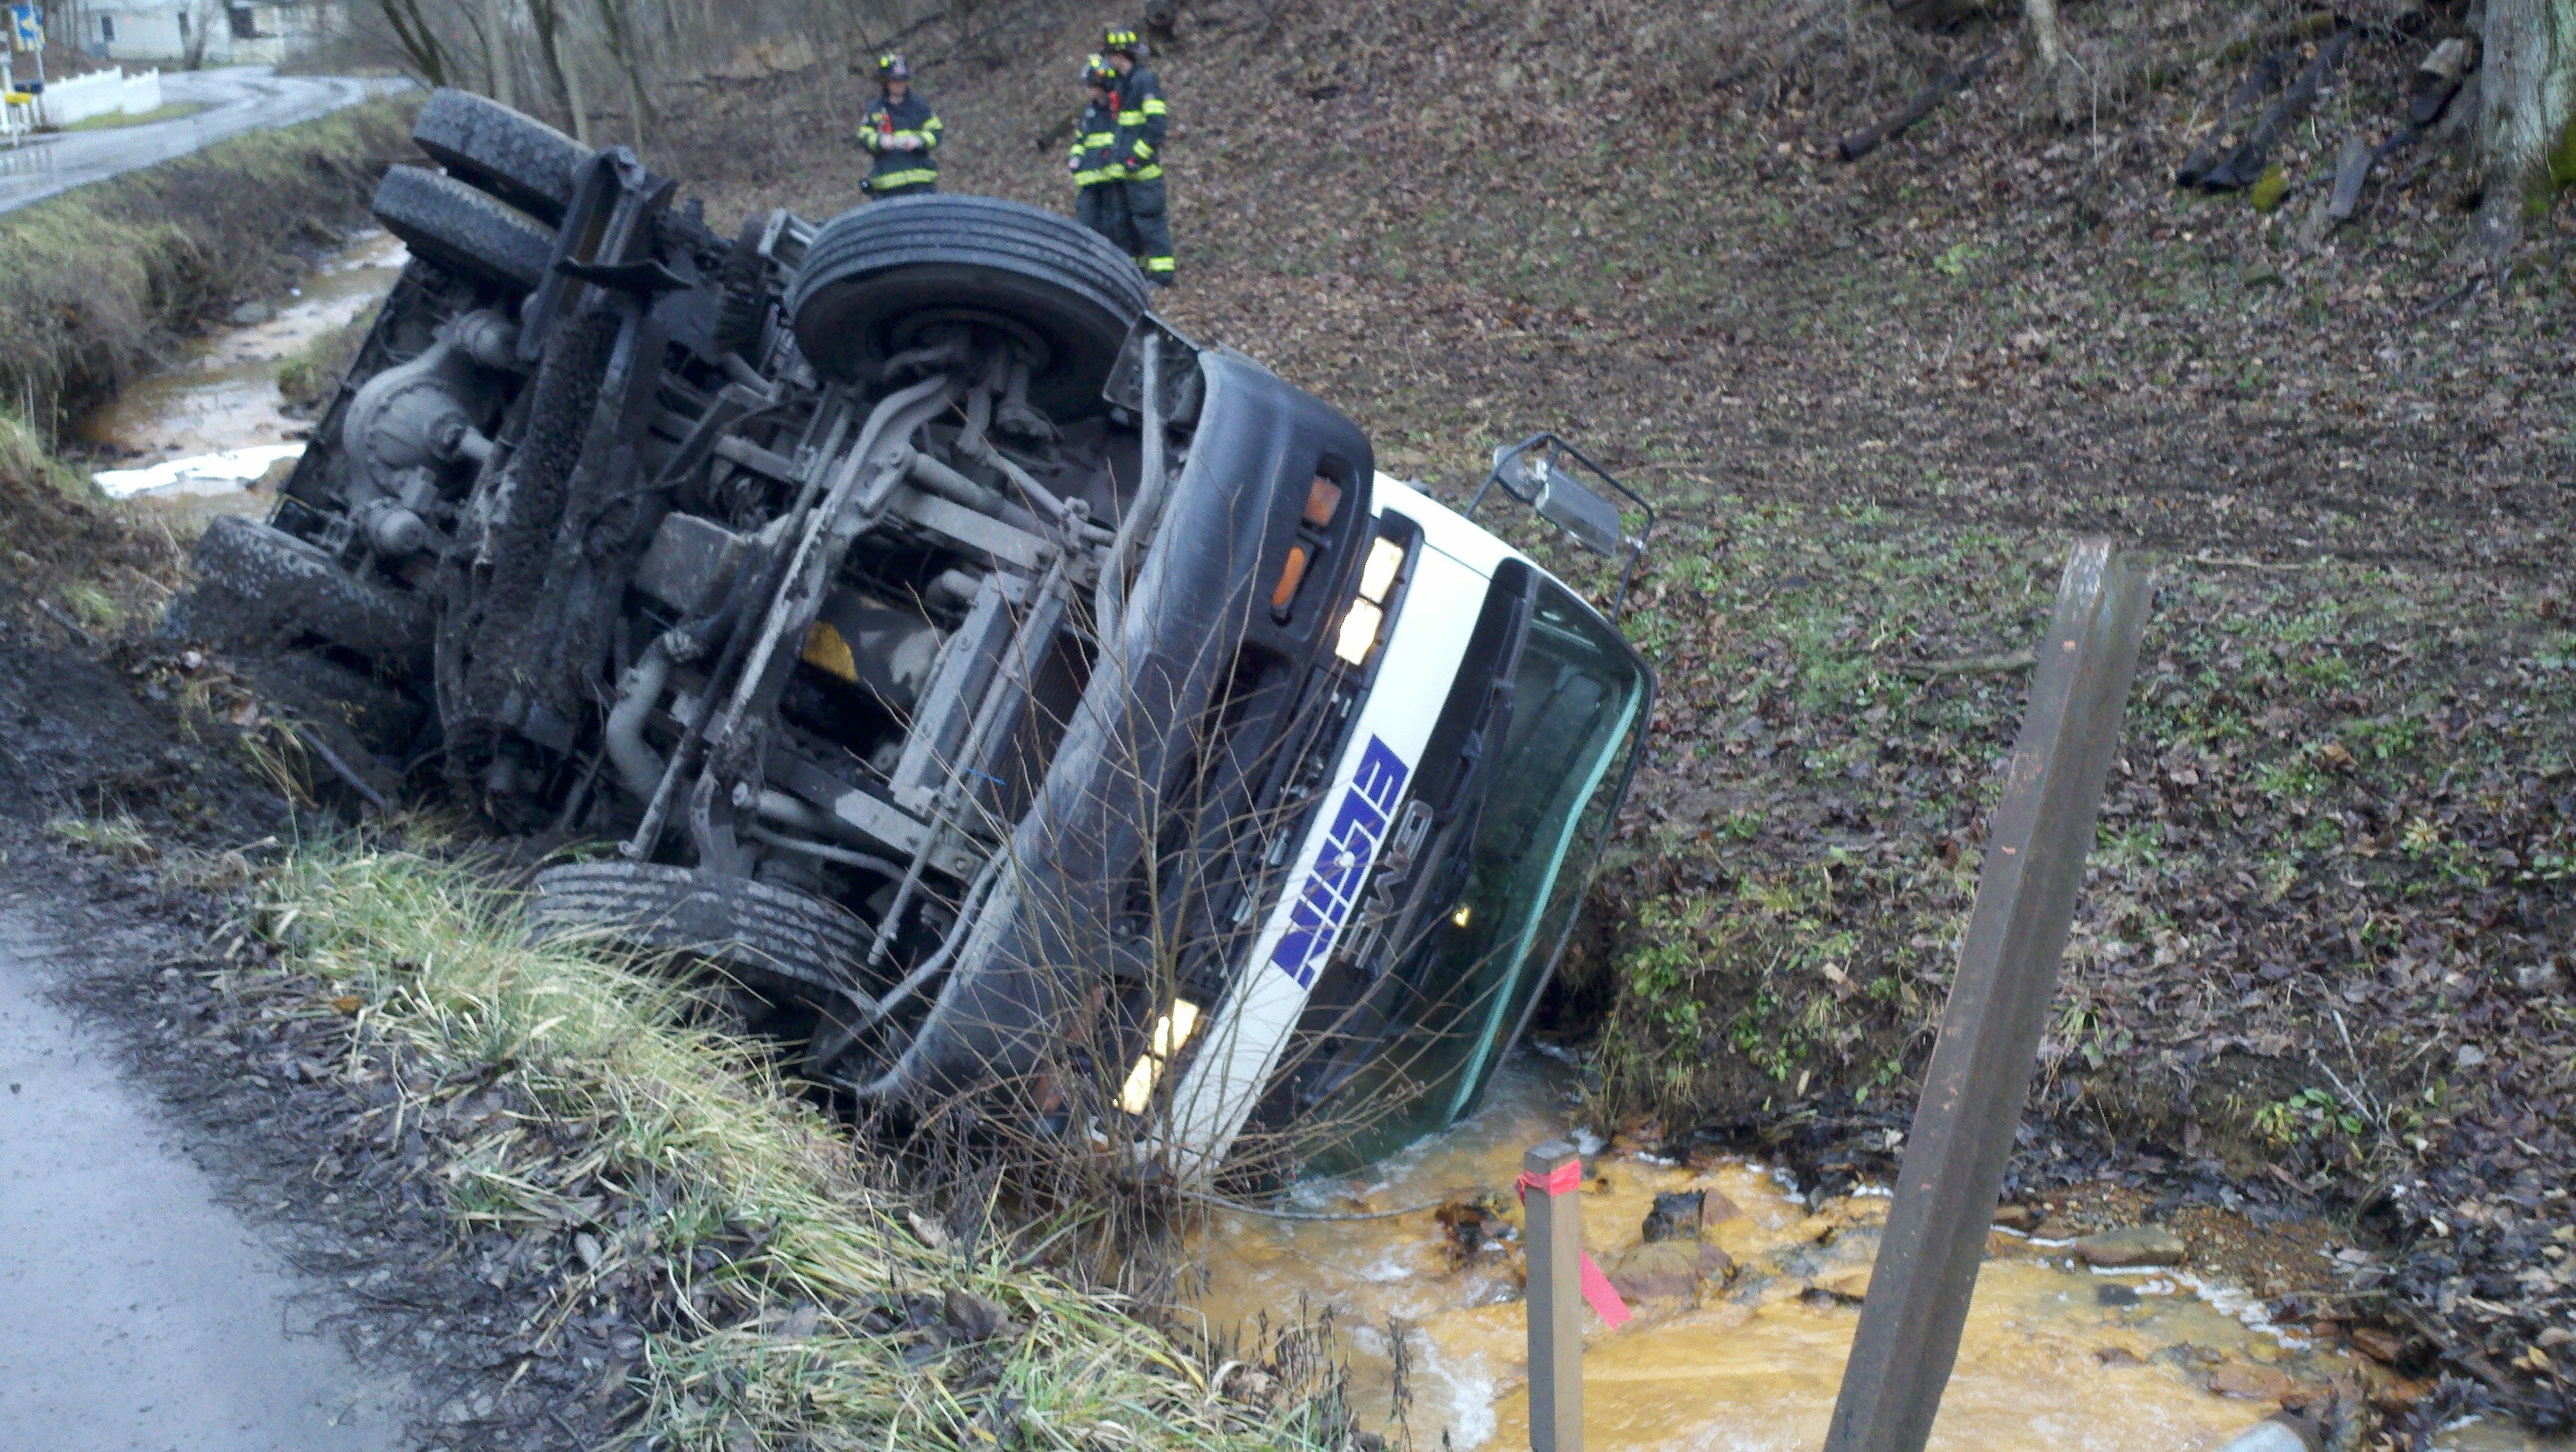 ... Fire Department and Monongalia County EMS also responded to the scene